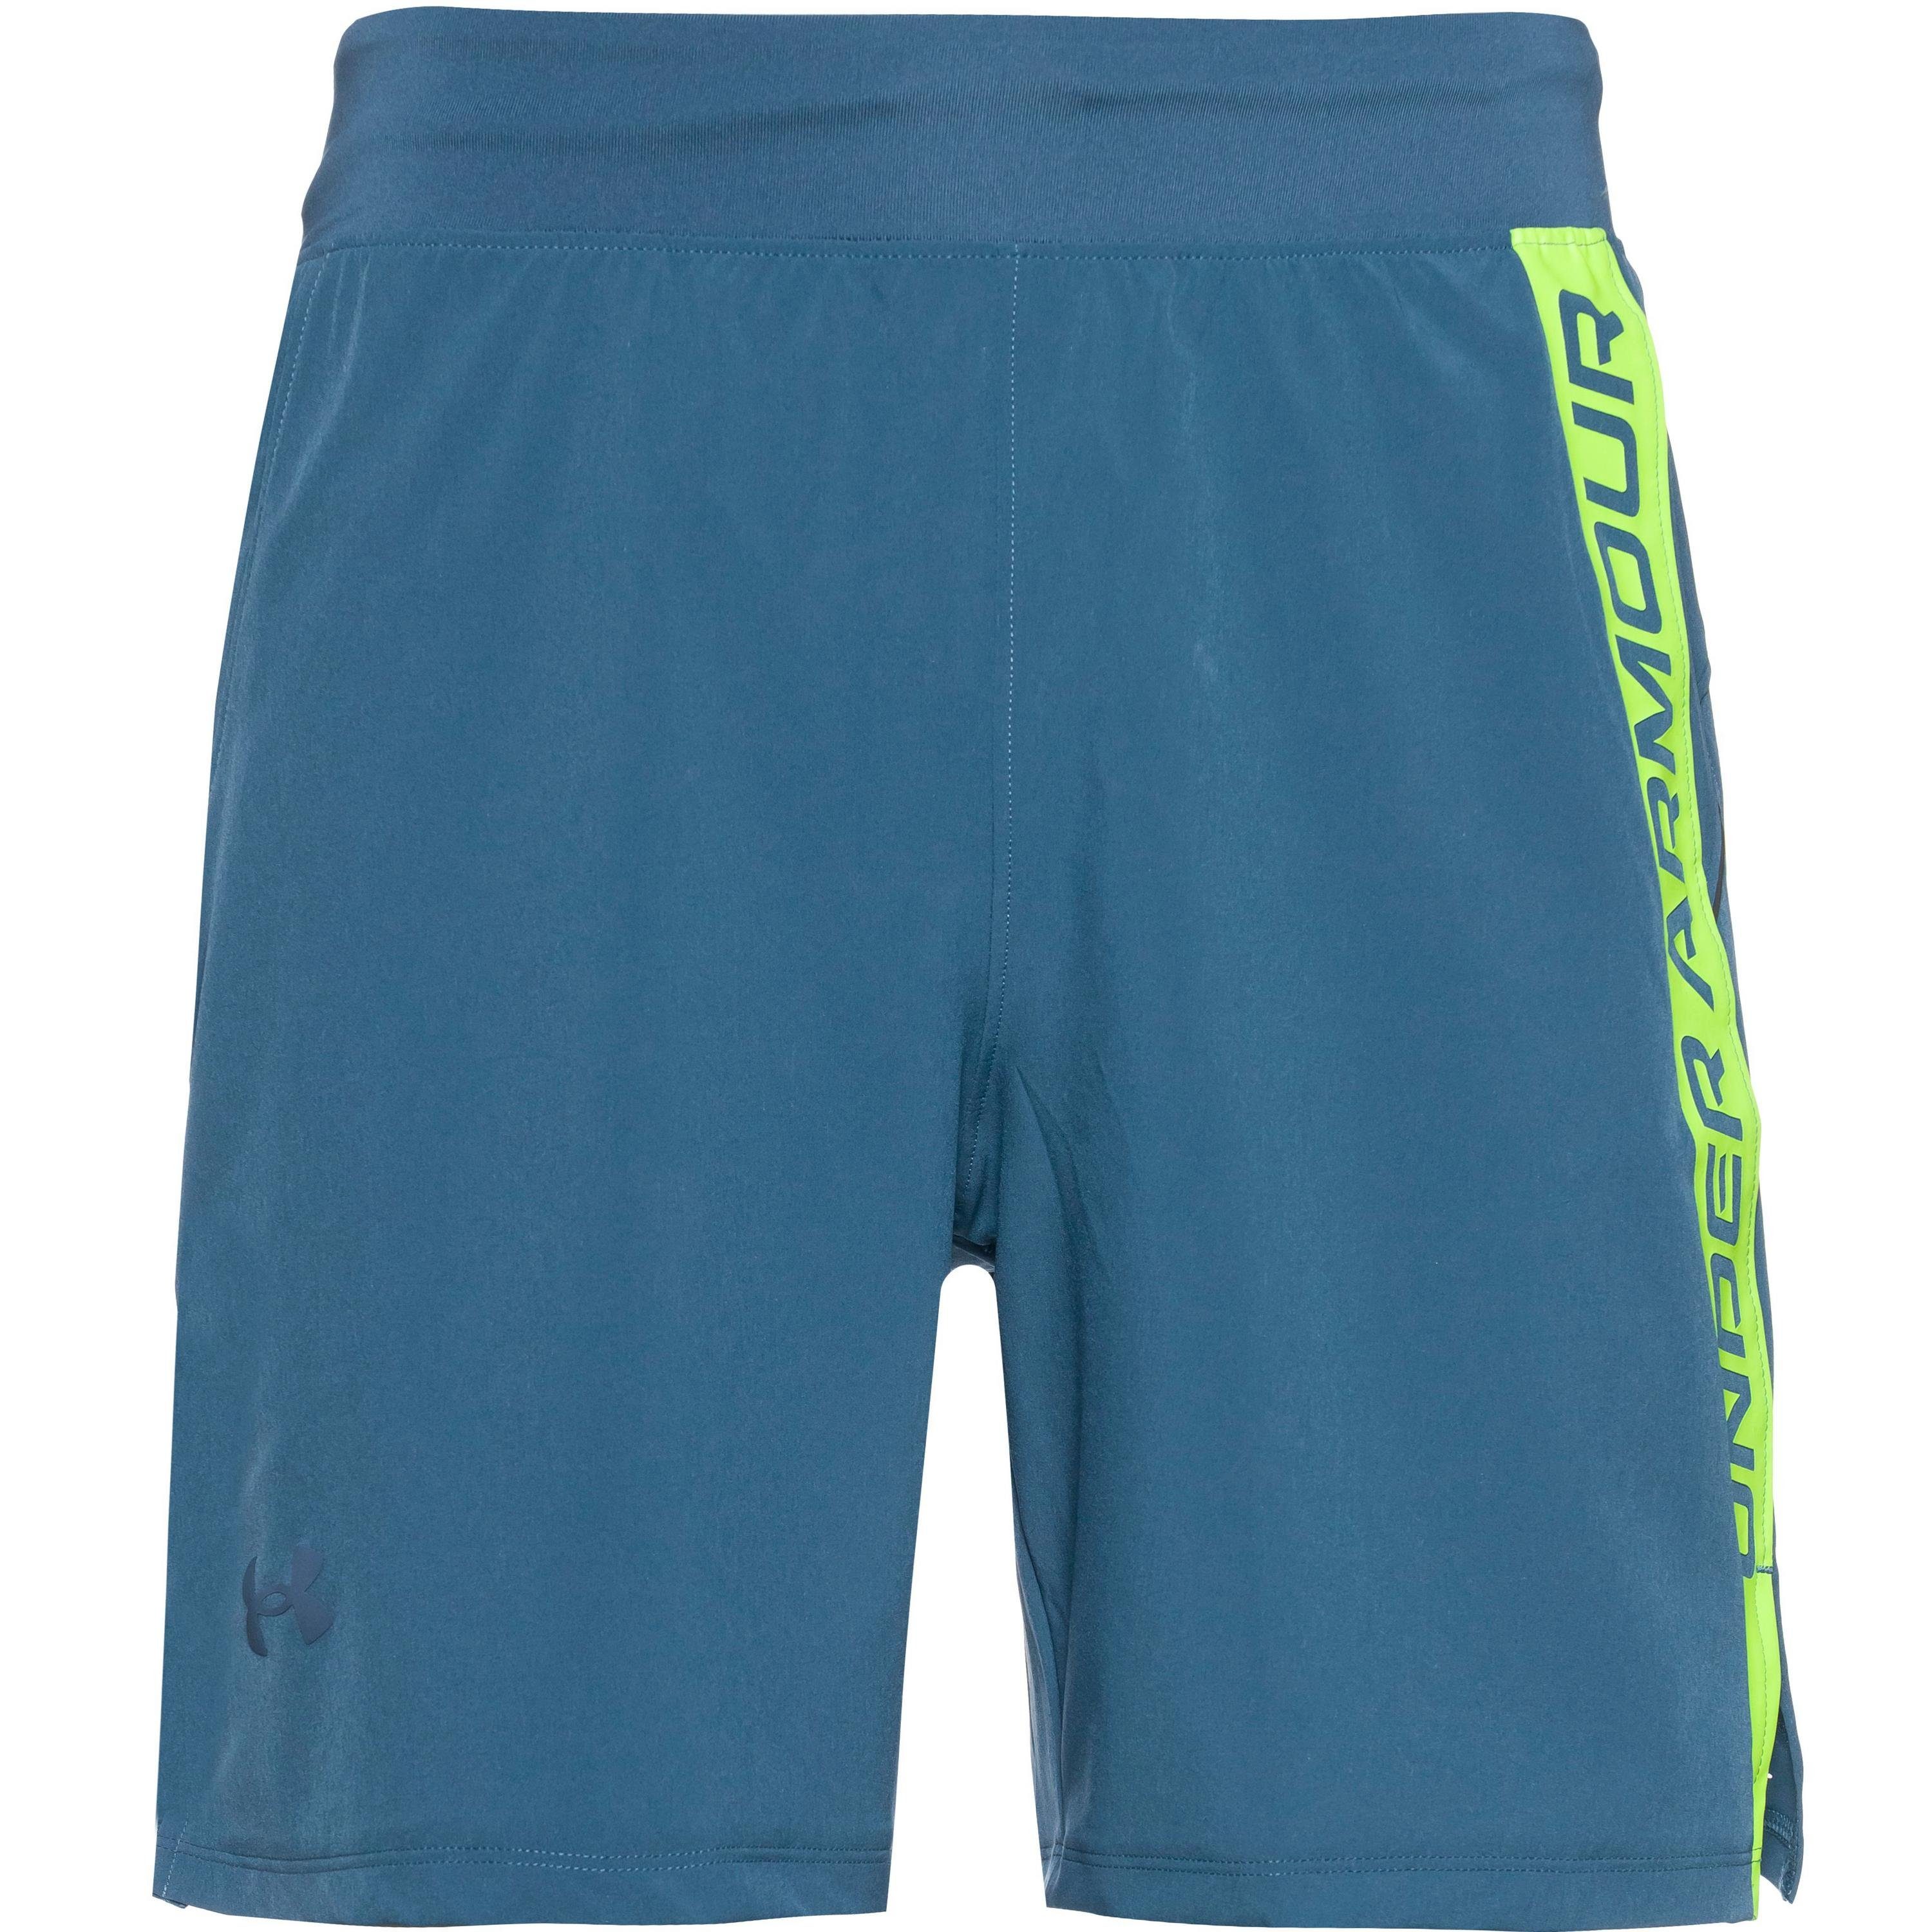 Under Armour® Funktionsshorts LAUNCH ELITE Static Blue 414